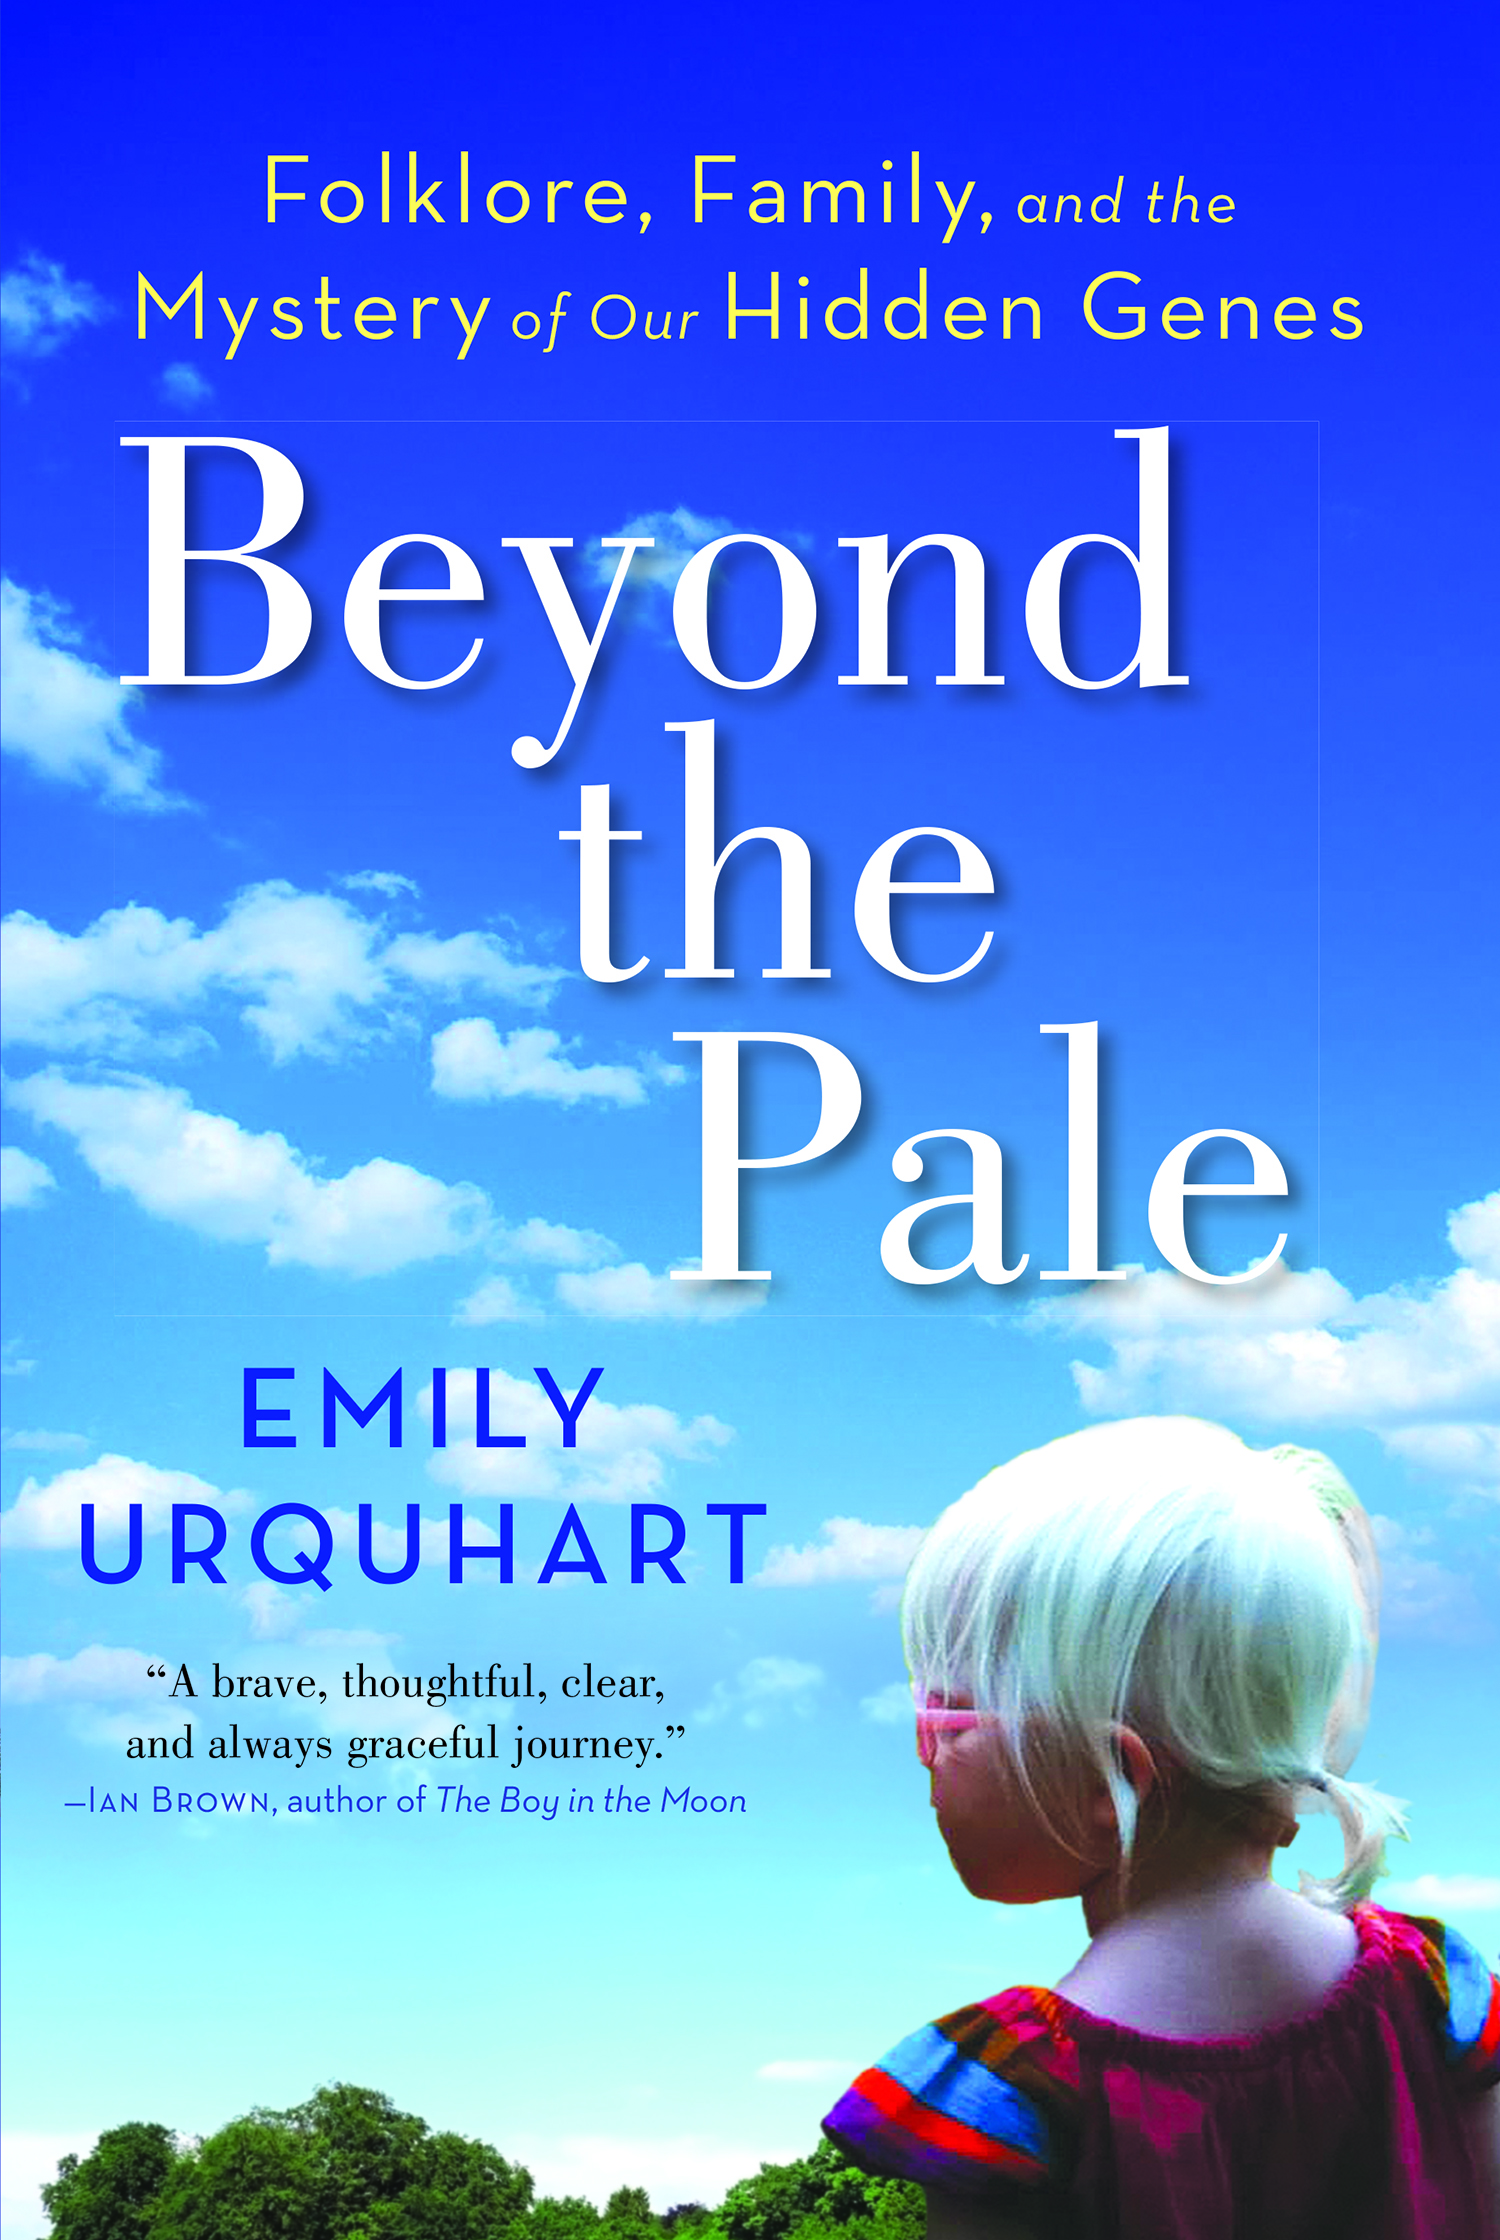 Beyond the Pale book jacket